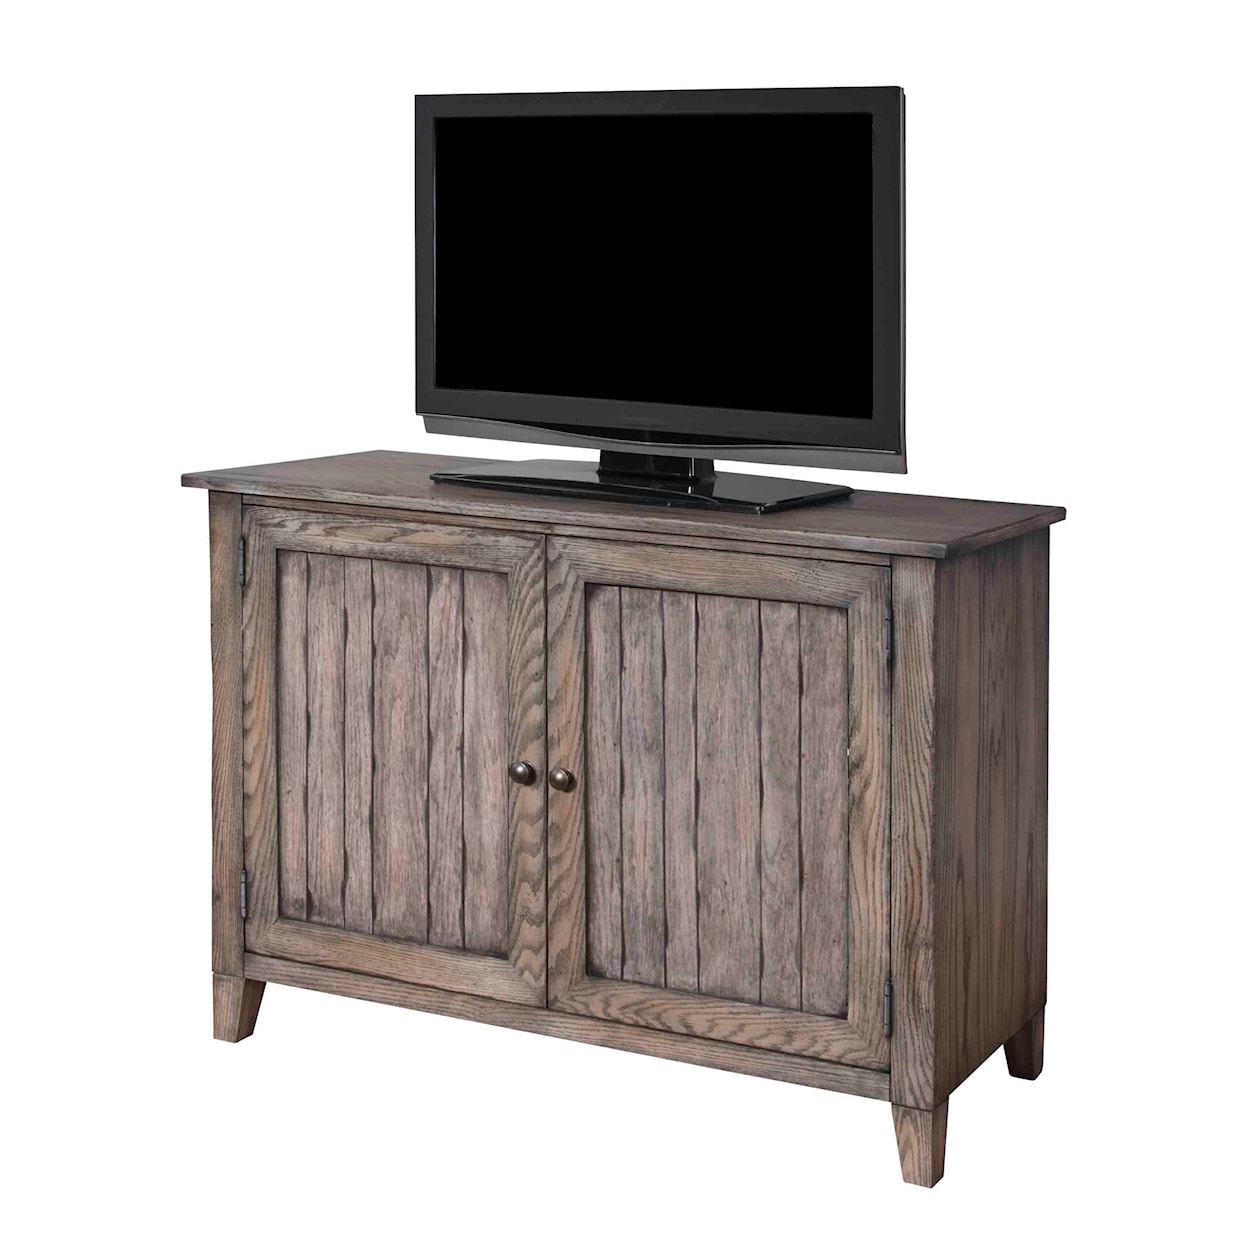 Martin Home Furnishings Eclectic Home Entertainment & Storage Storage Console